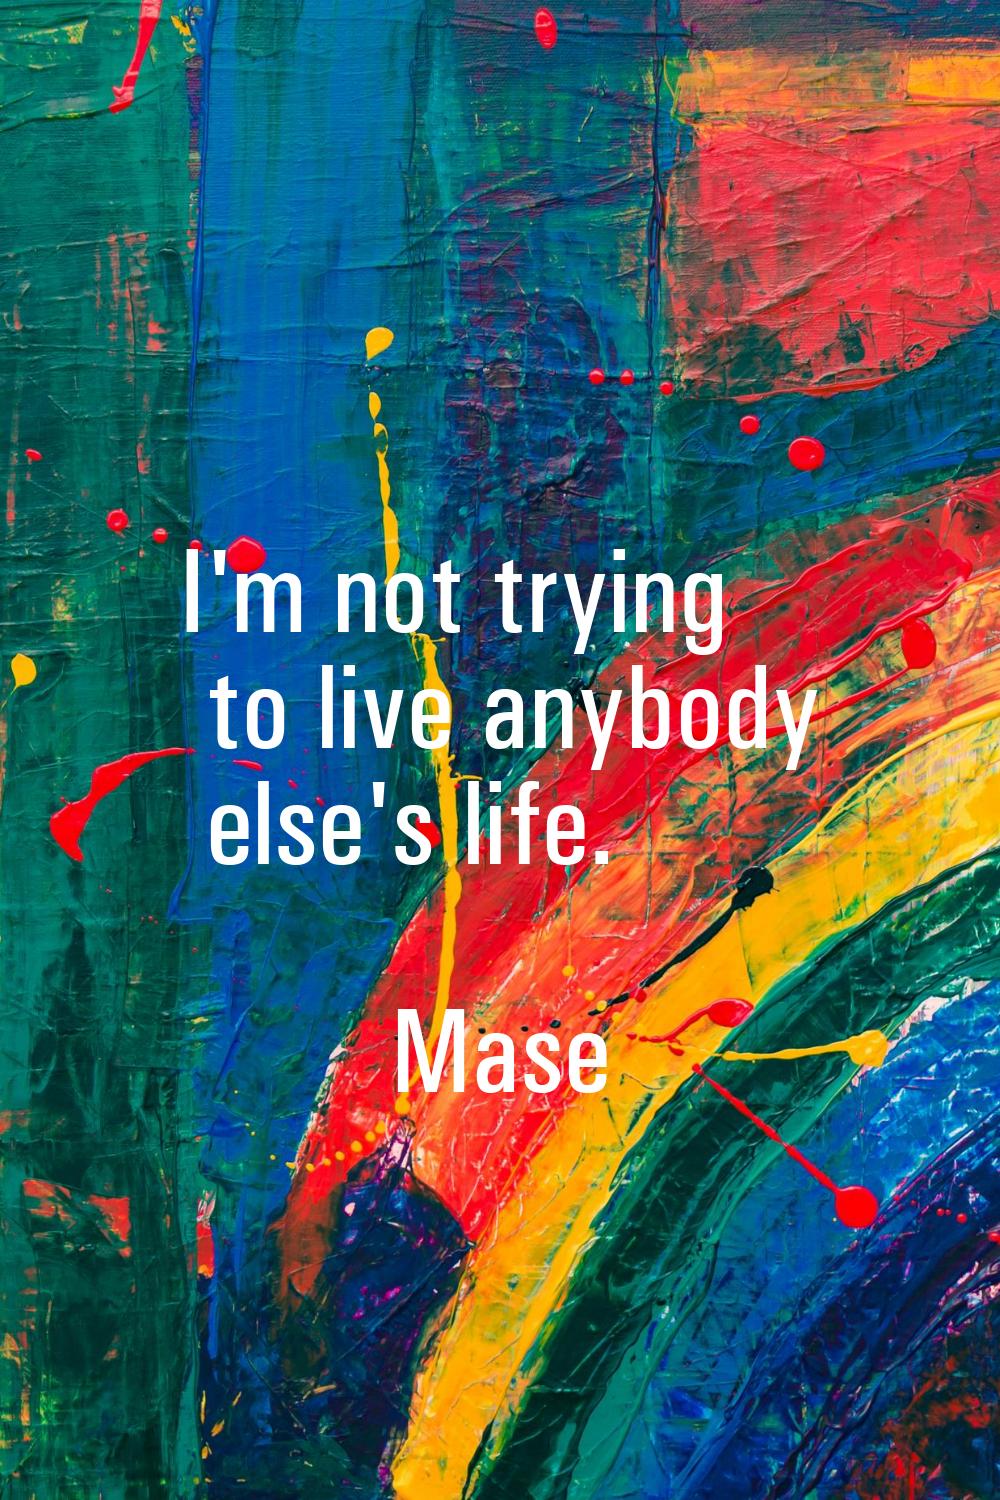 I'm not trying to live anybody else's life.